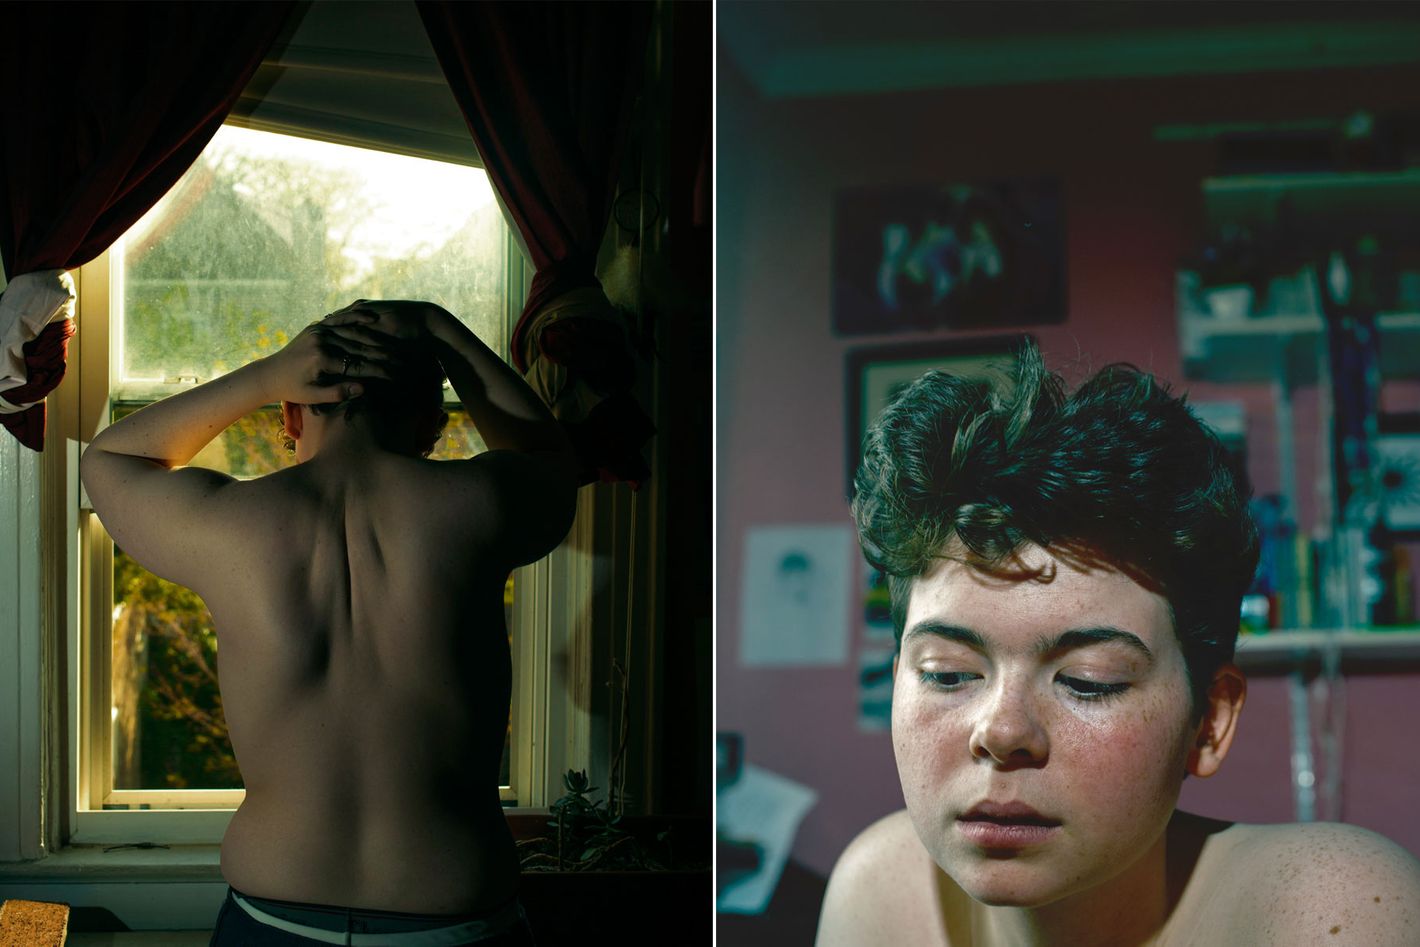 See Powerful Photos of Female-to-Male Transition image pic